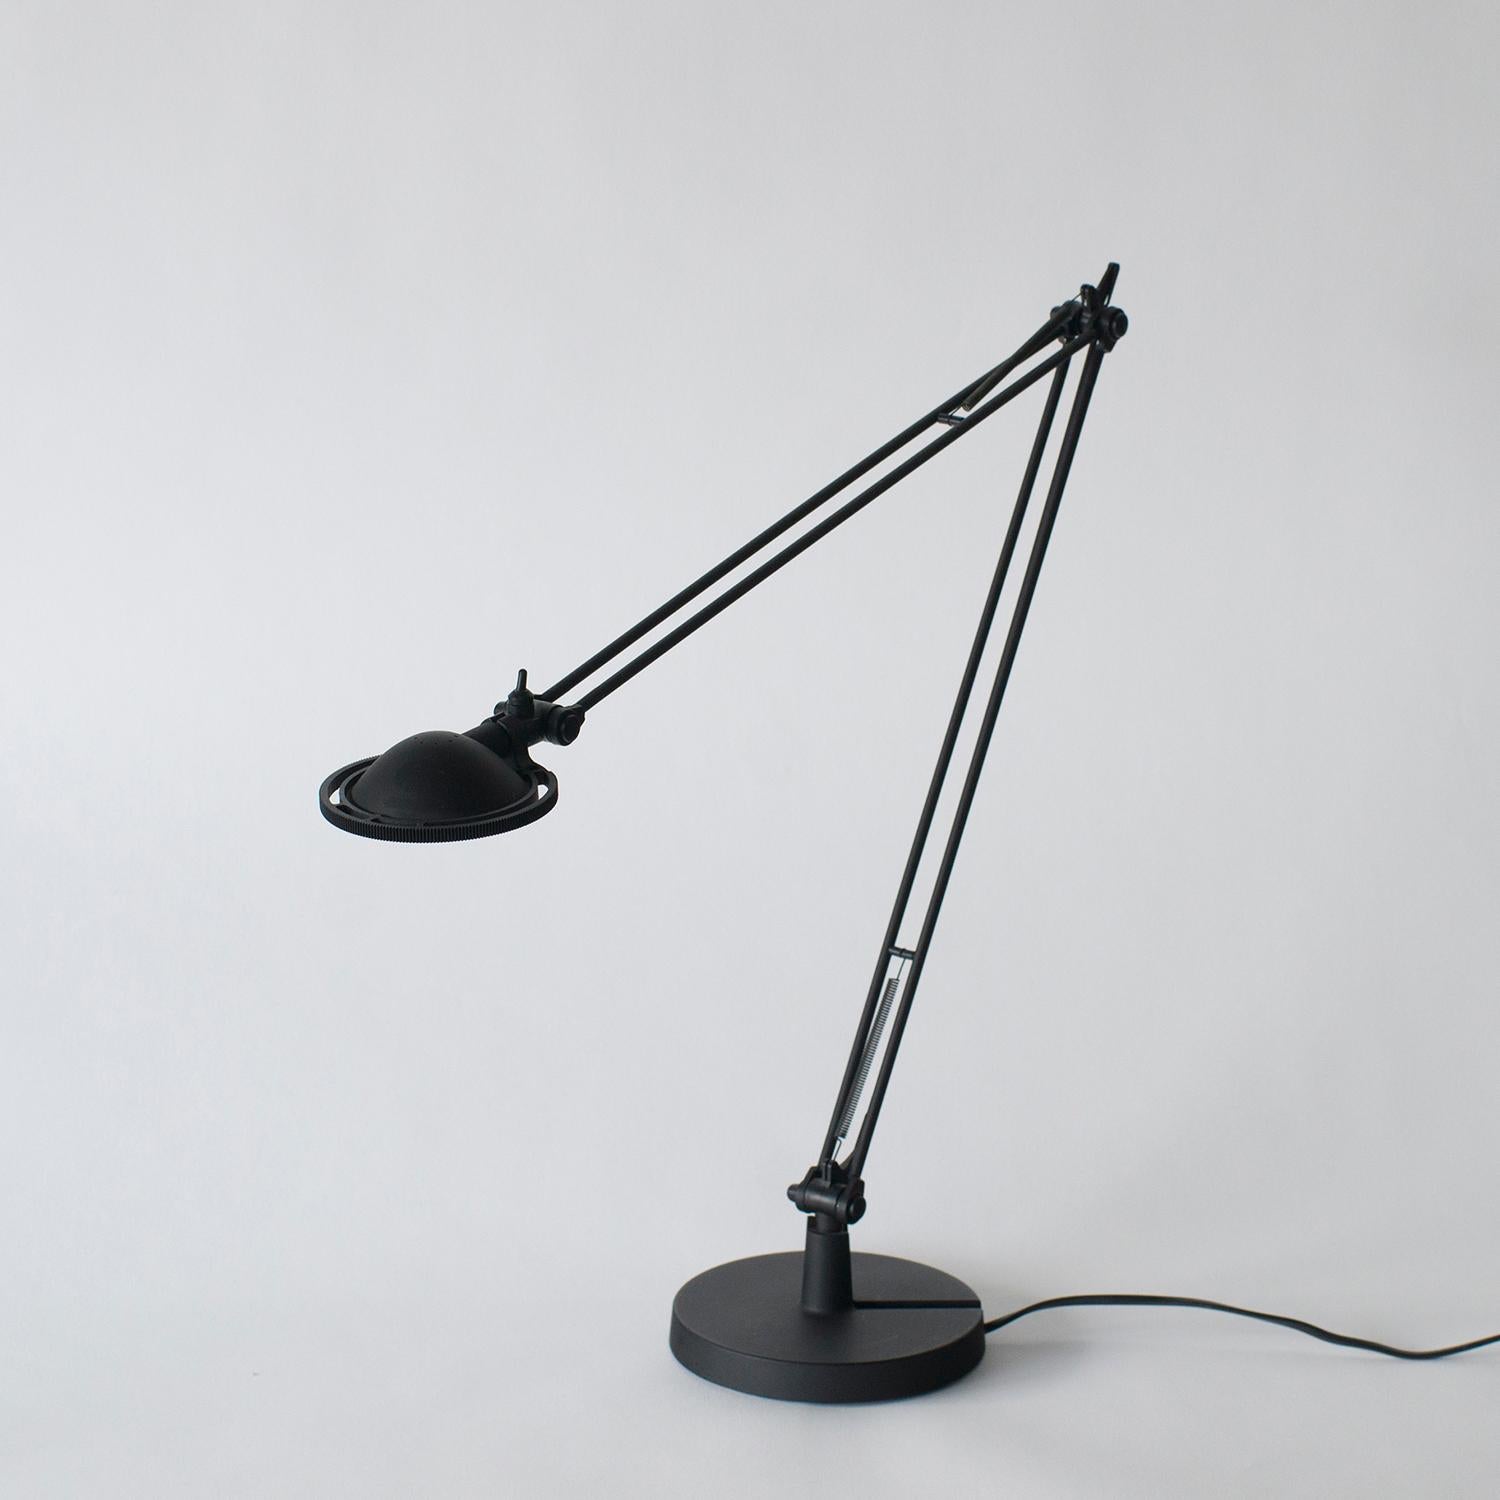 Berenice desk lamp designed by Alberto Meda and Paolo Rizzatto for Luceplan.
Made of steel. All Black colored model. 100-120V, an electric plug, Usable in US.
Made of two arms which sizes are 45 cm each.